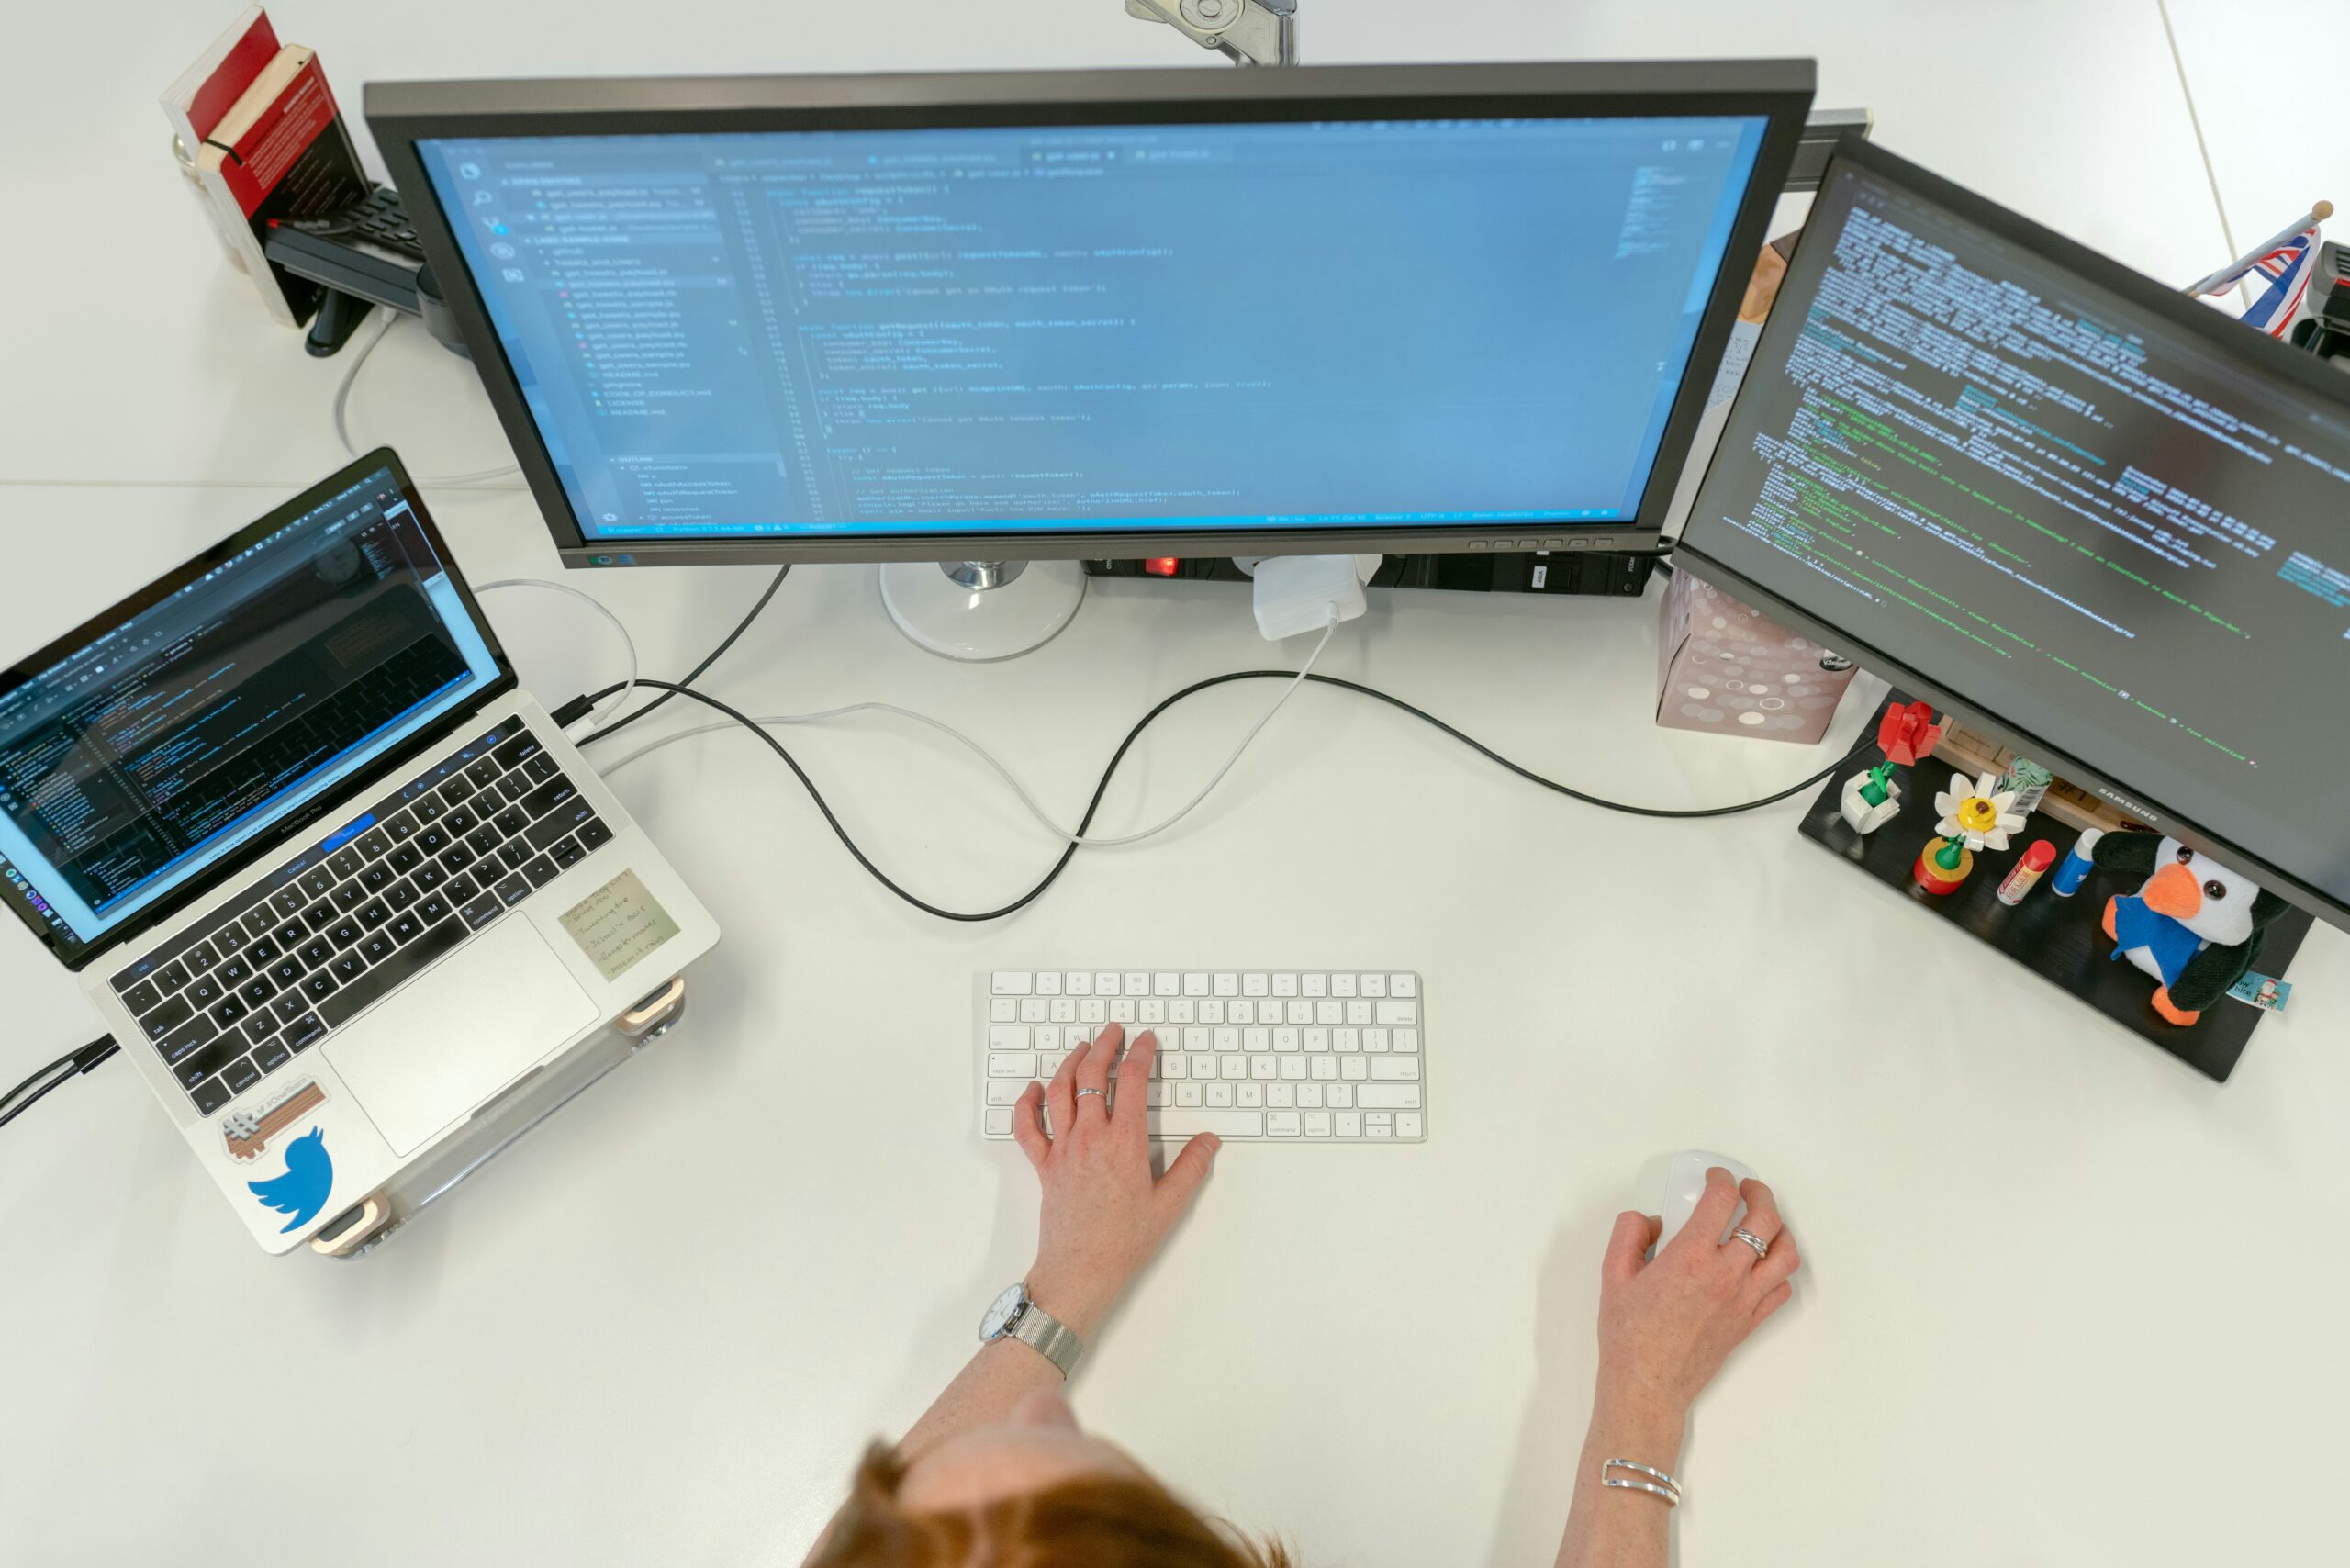 A person typing on a keyboard at a desk with three computer screens displaying code related to fully managed IT services and a laptop on the side.